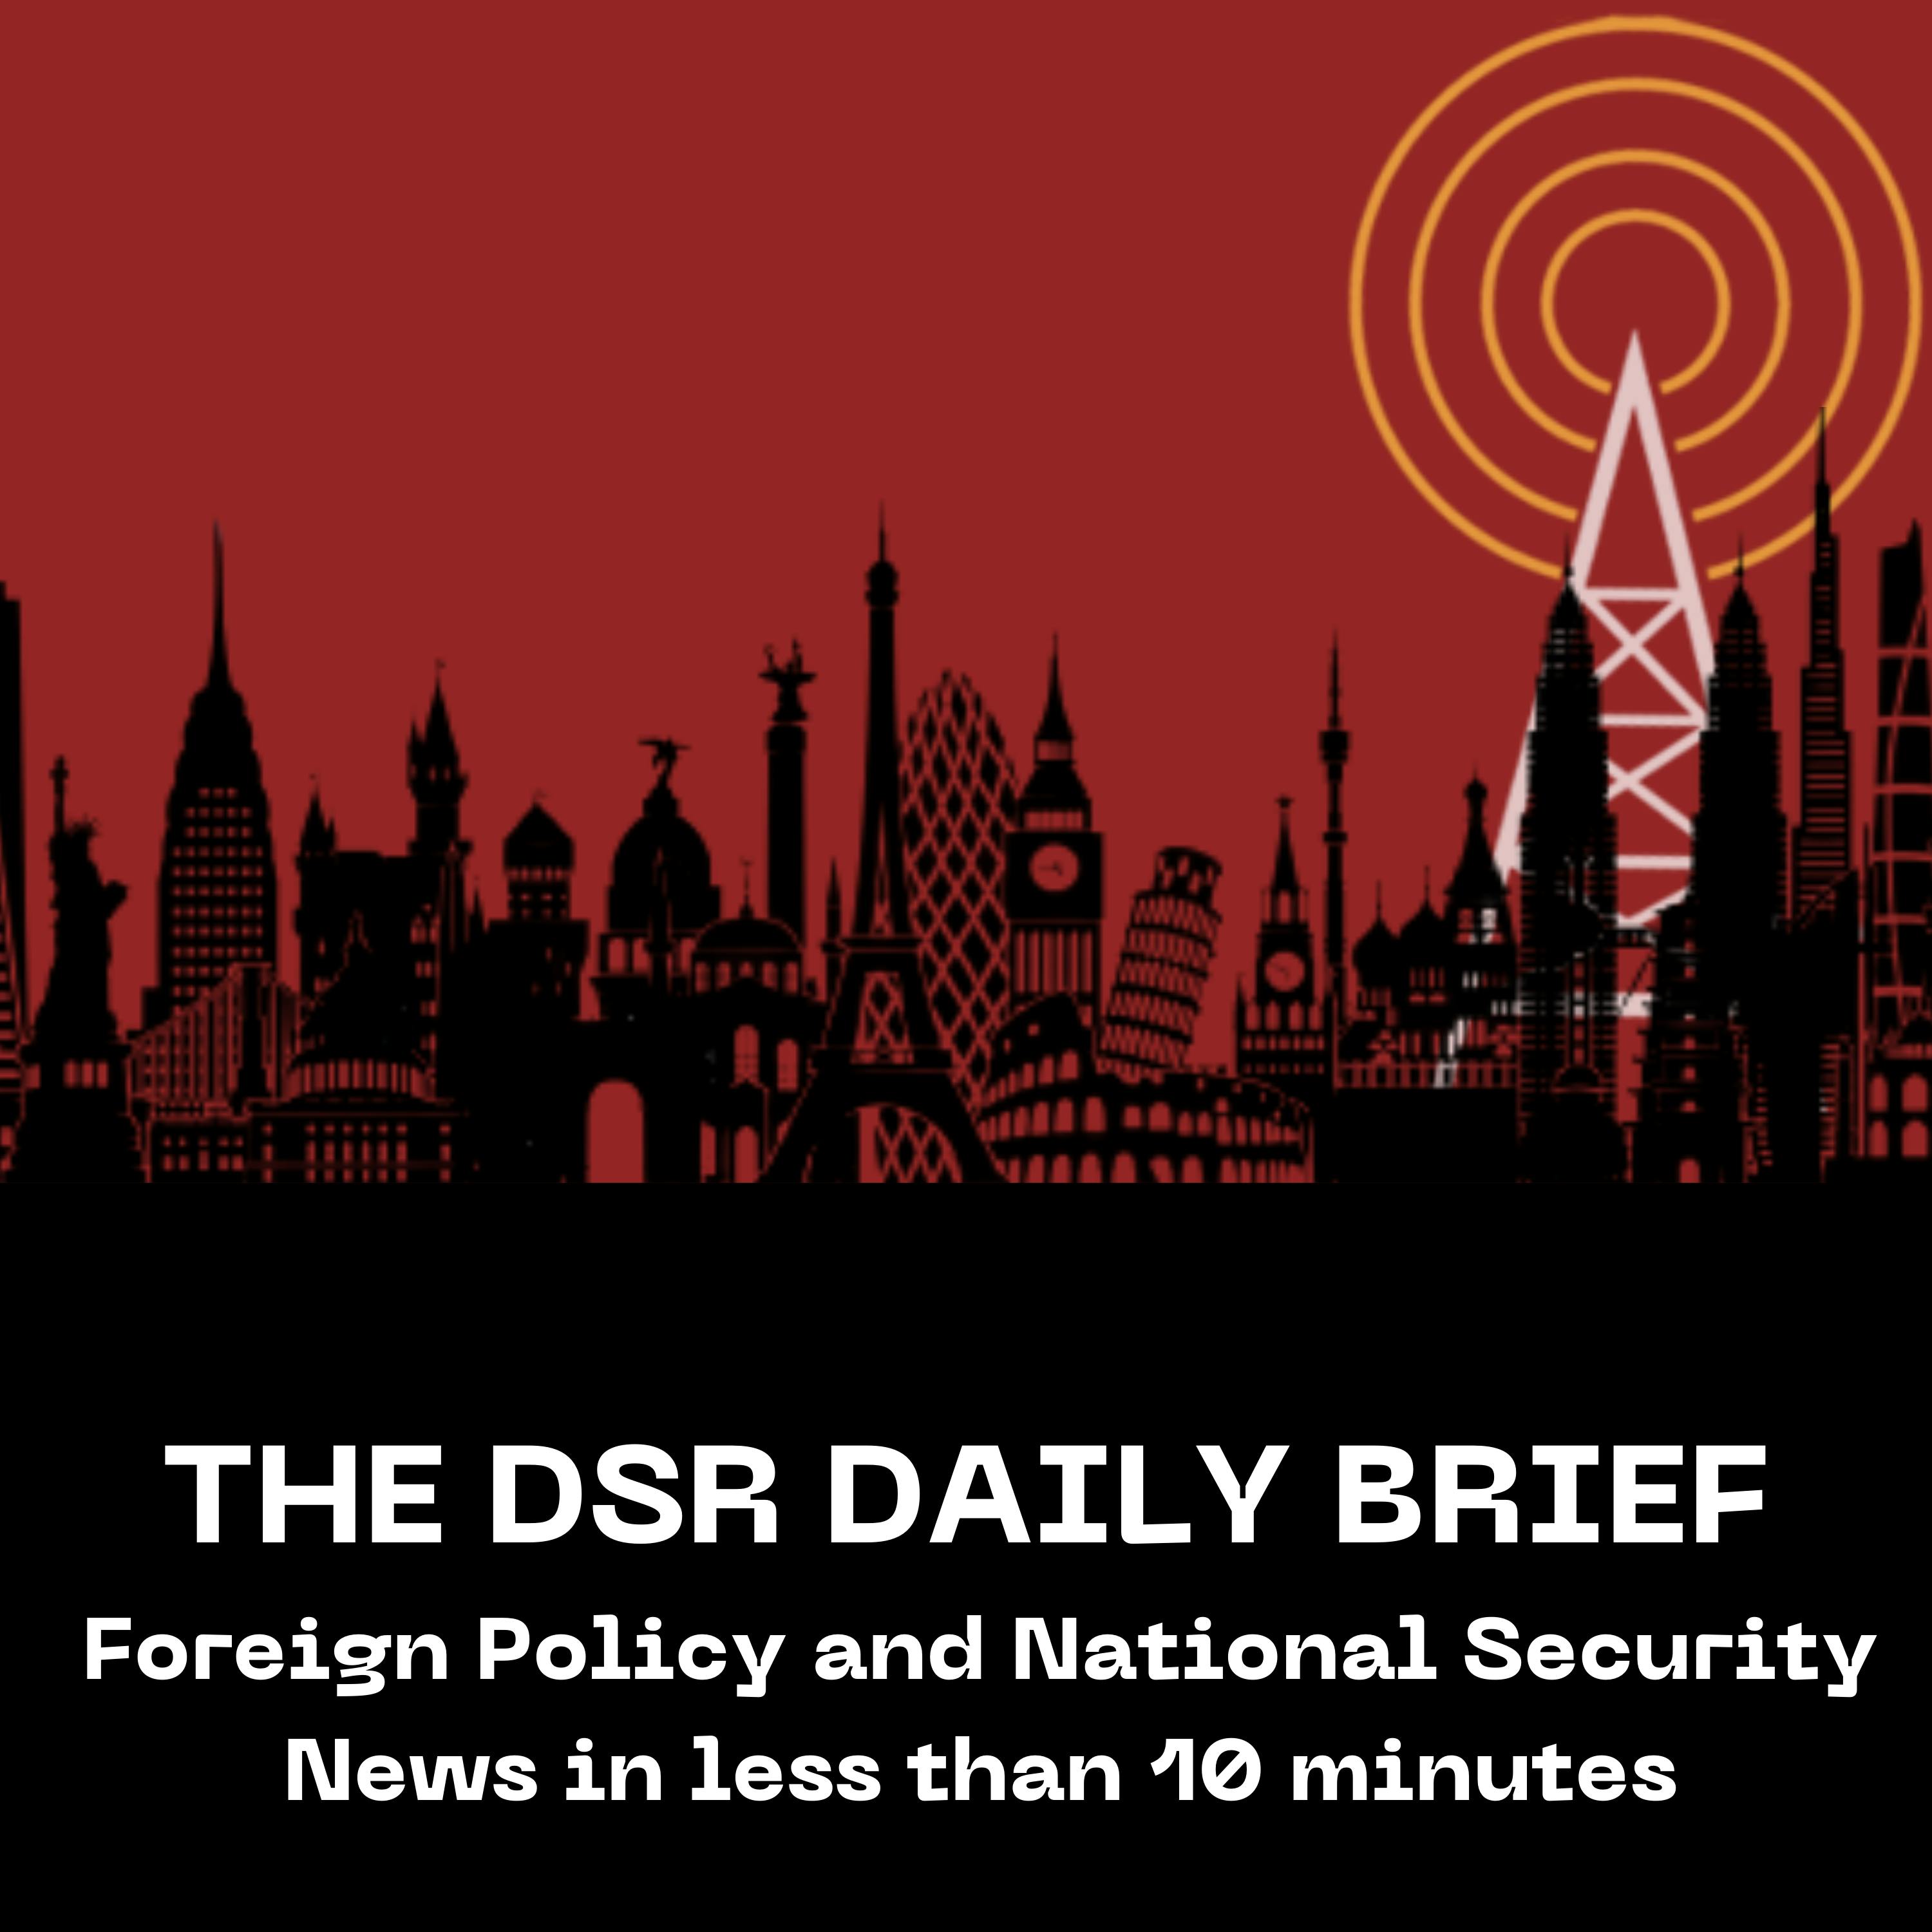 The DSR Daily for April 22: House Passes Aid Bill, Israeli IDF Intelligence Head Resigns